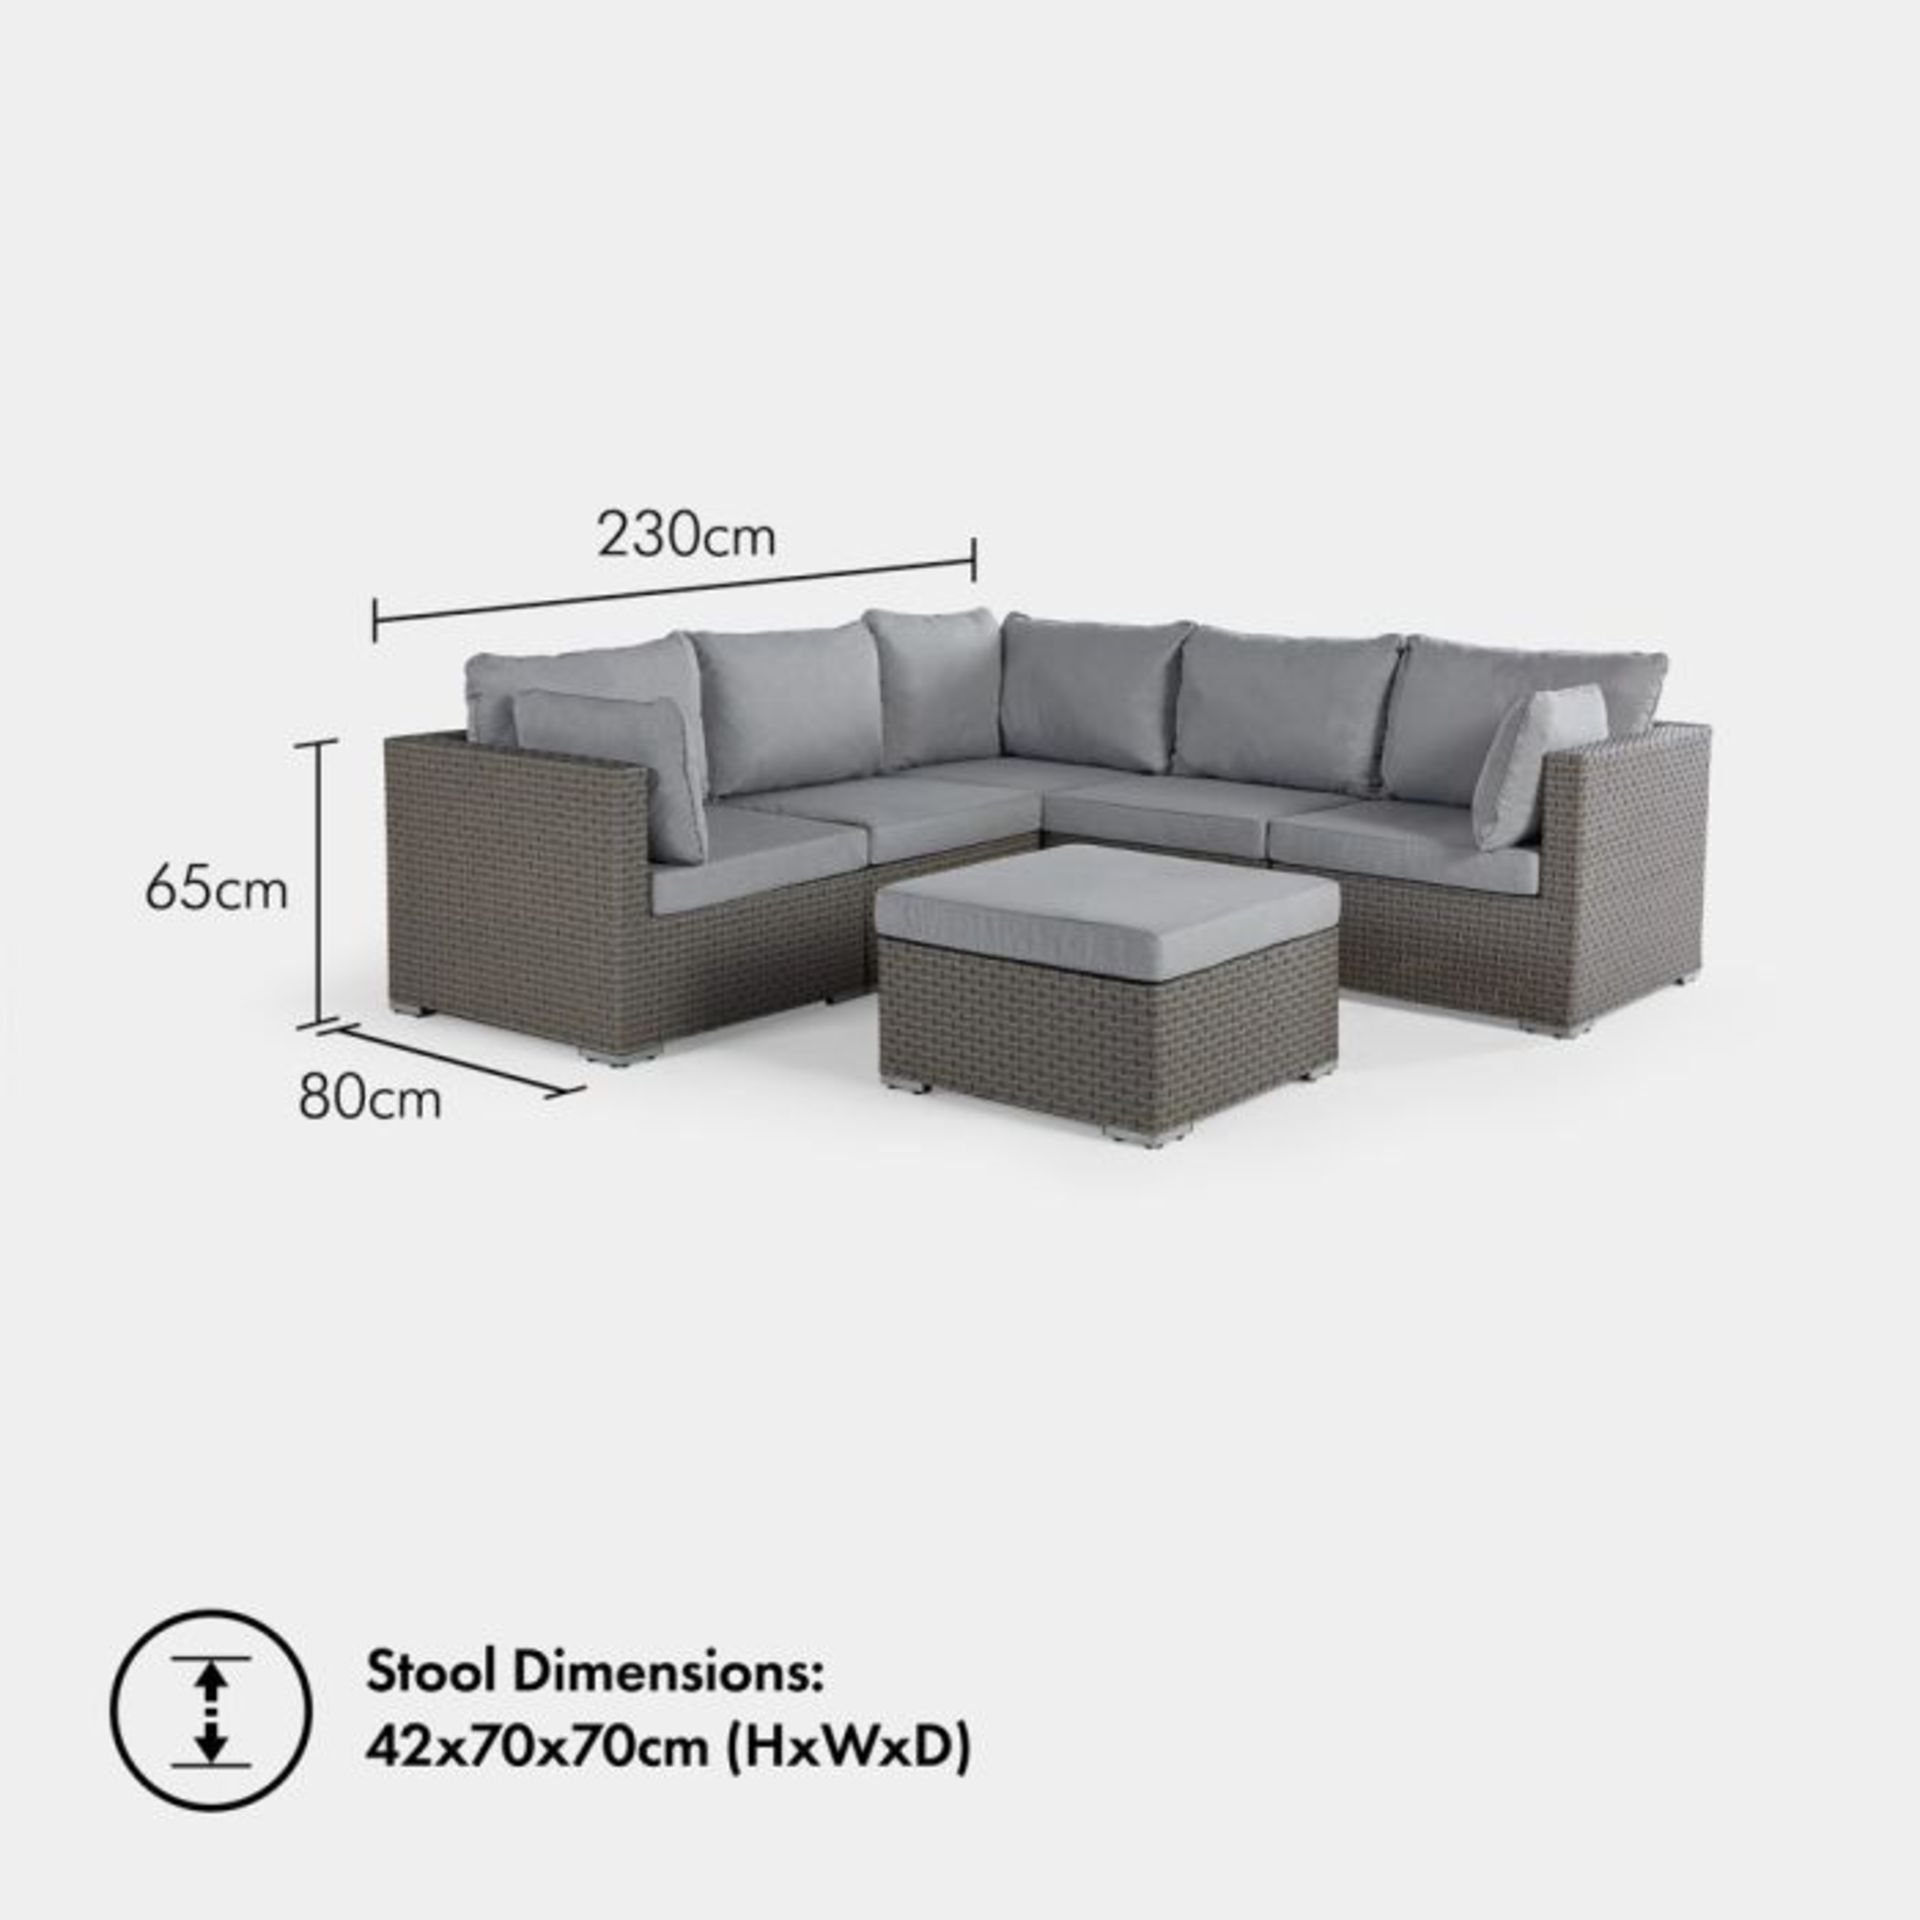 New & Boxed 6 Seater Amefi Rattan Corner Sofa Set. RRP £1,329. Be ready for any garden party and - Image 3 of 3